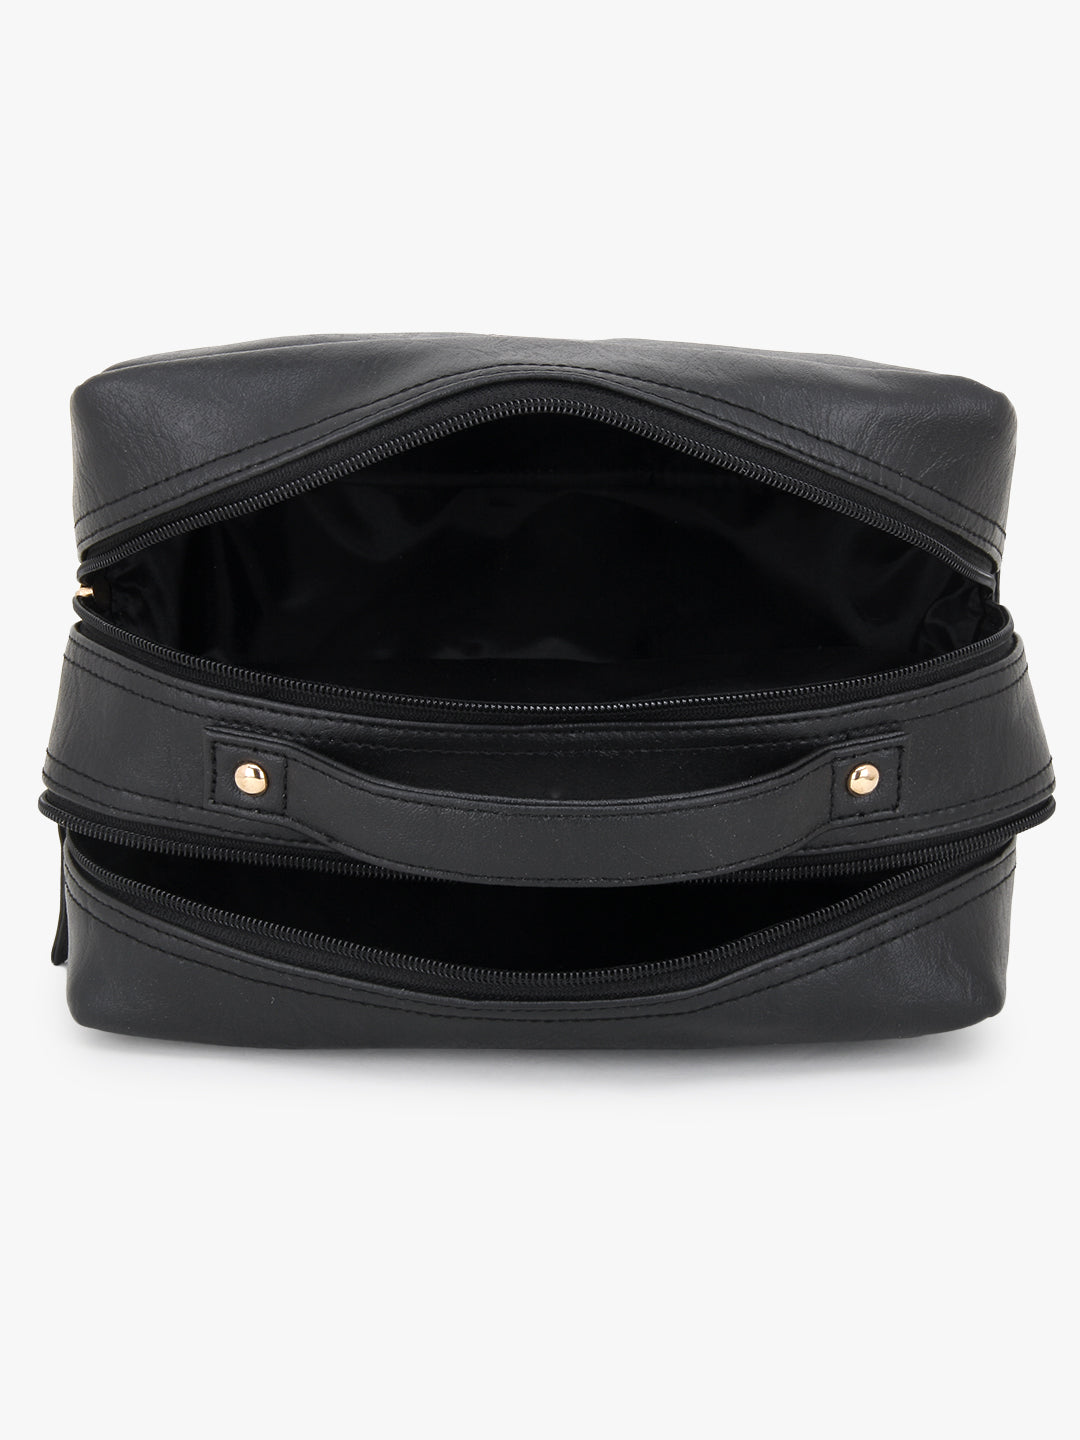 Two Compartment Travel Kit in Black